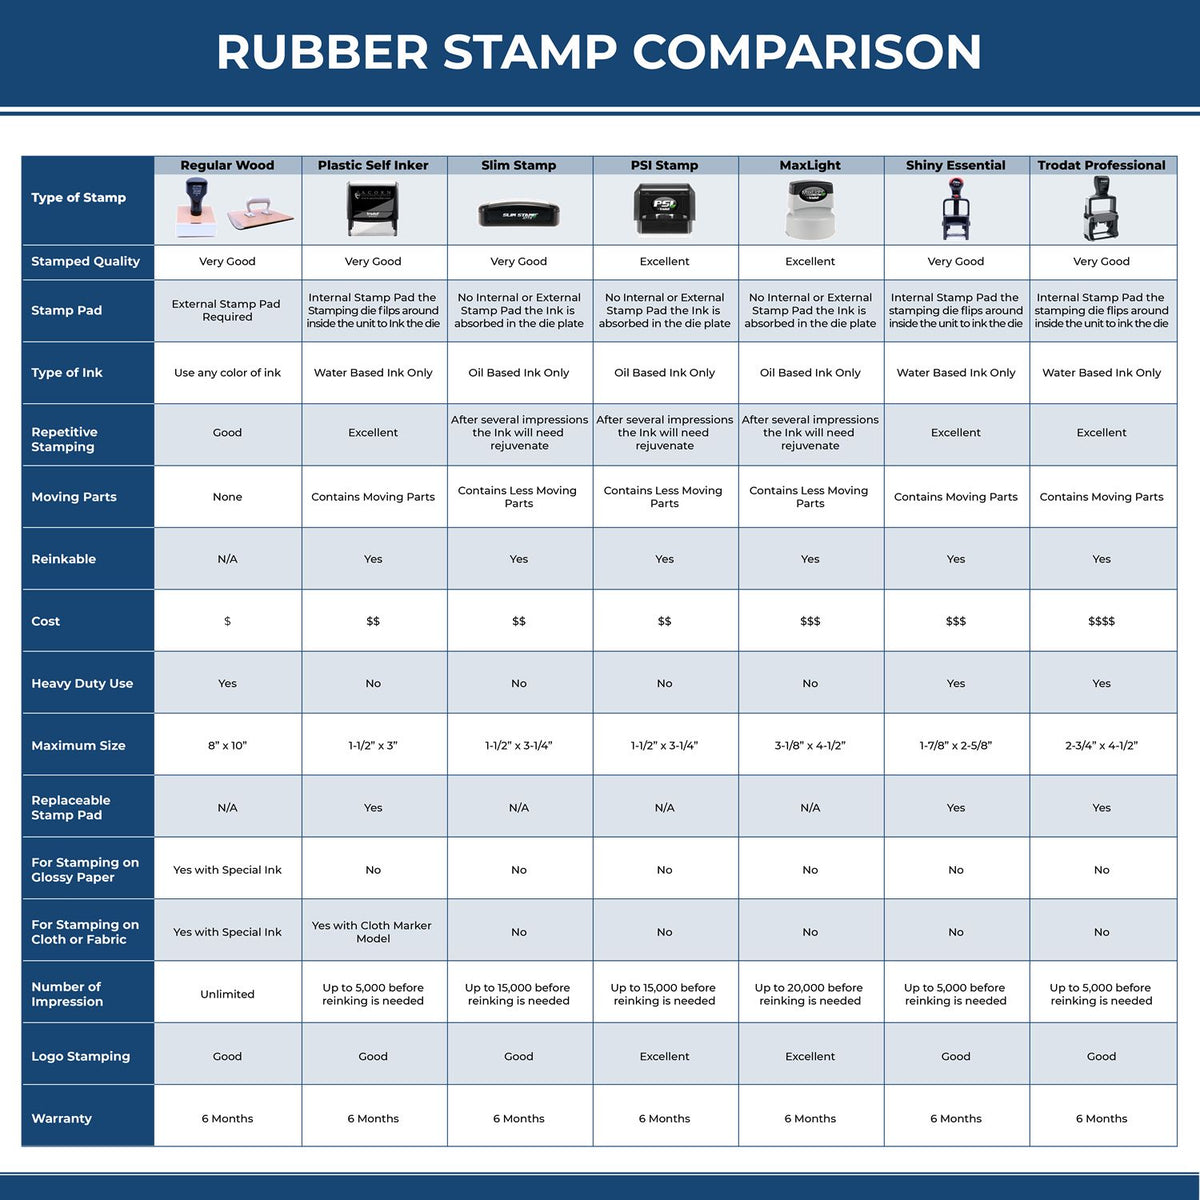 Large Self-Inking Bold Admitted Stamp 4858S Rubber Stamp Comparison